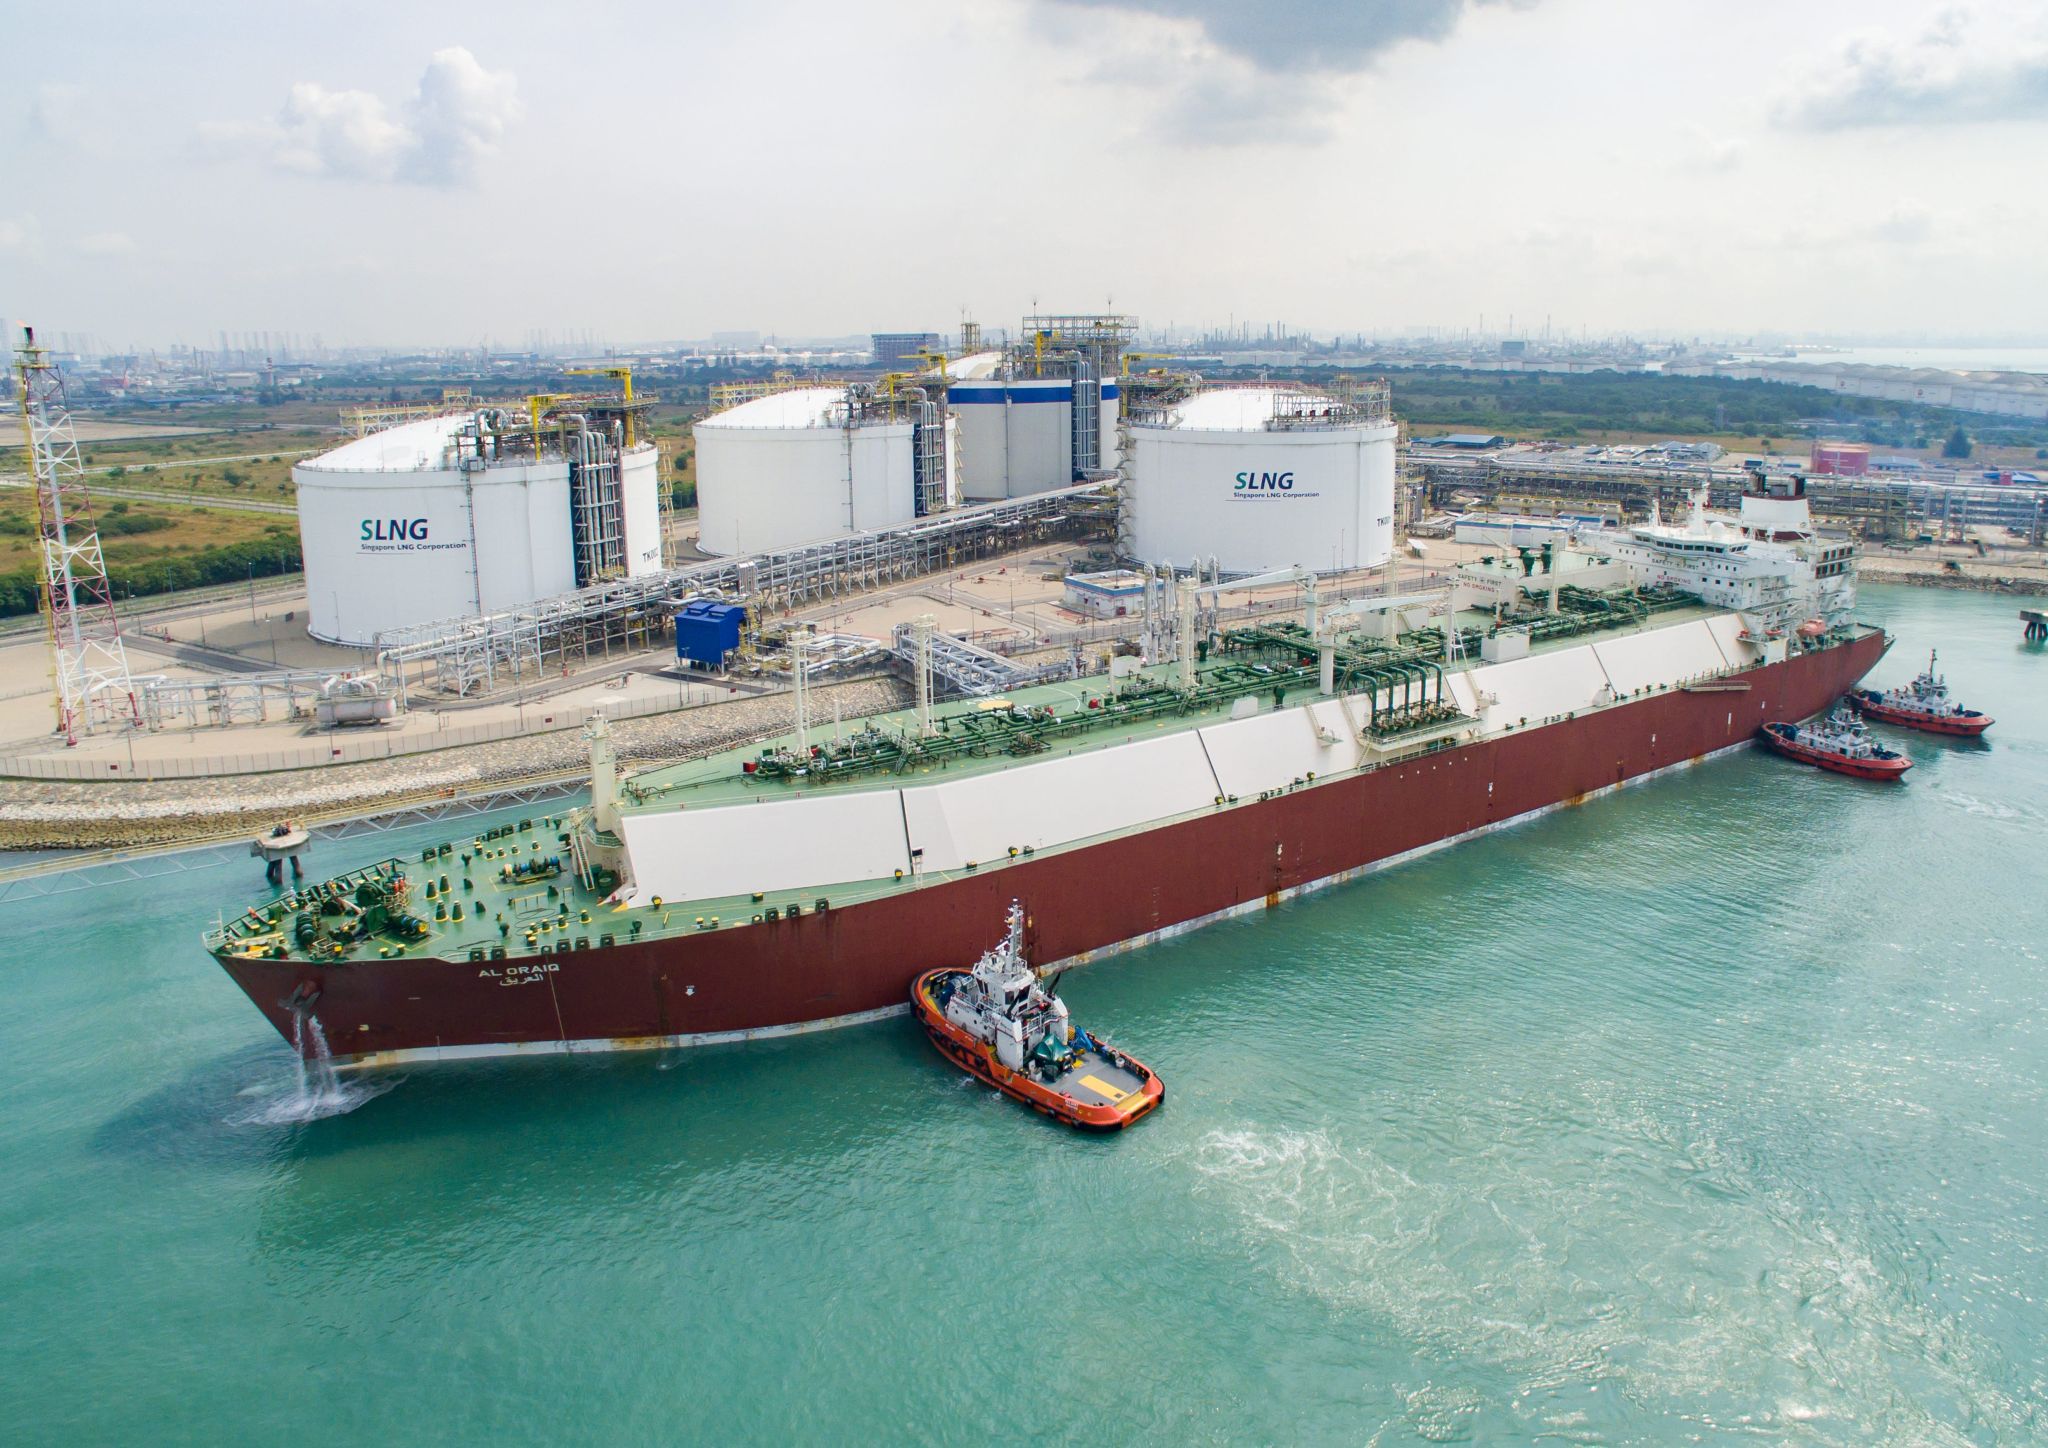 Singapore’s Pavilion inks 10-year LNG supply deal with BP